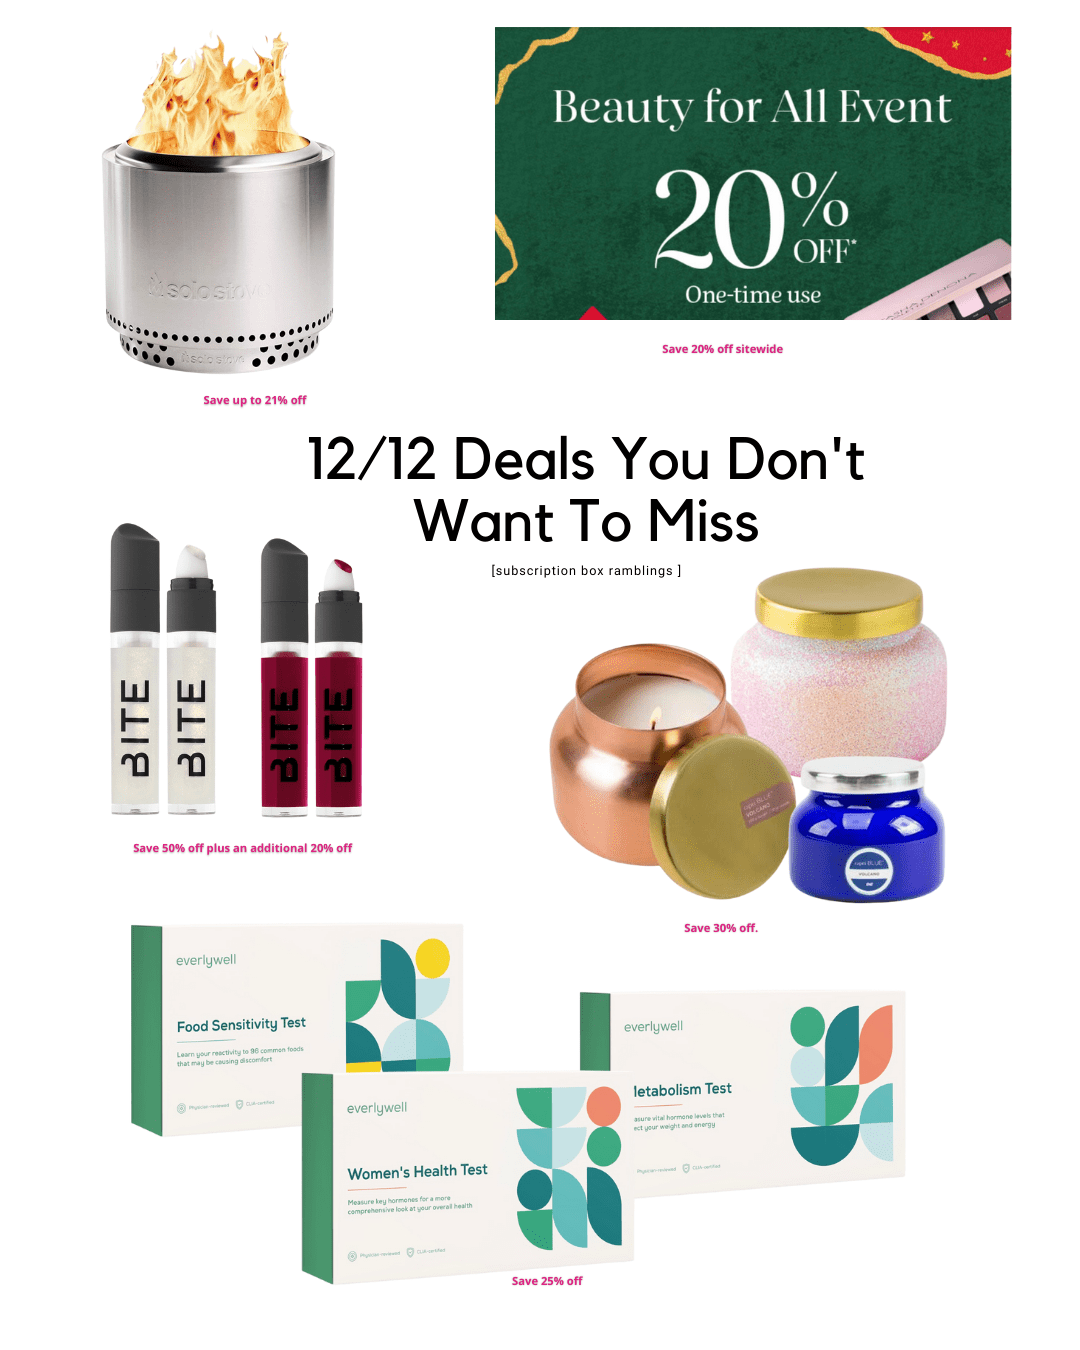 Deals You Don’t Want to Miss – 12/12